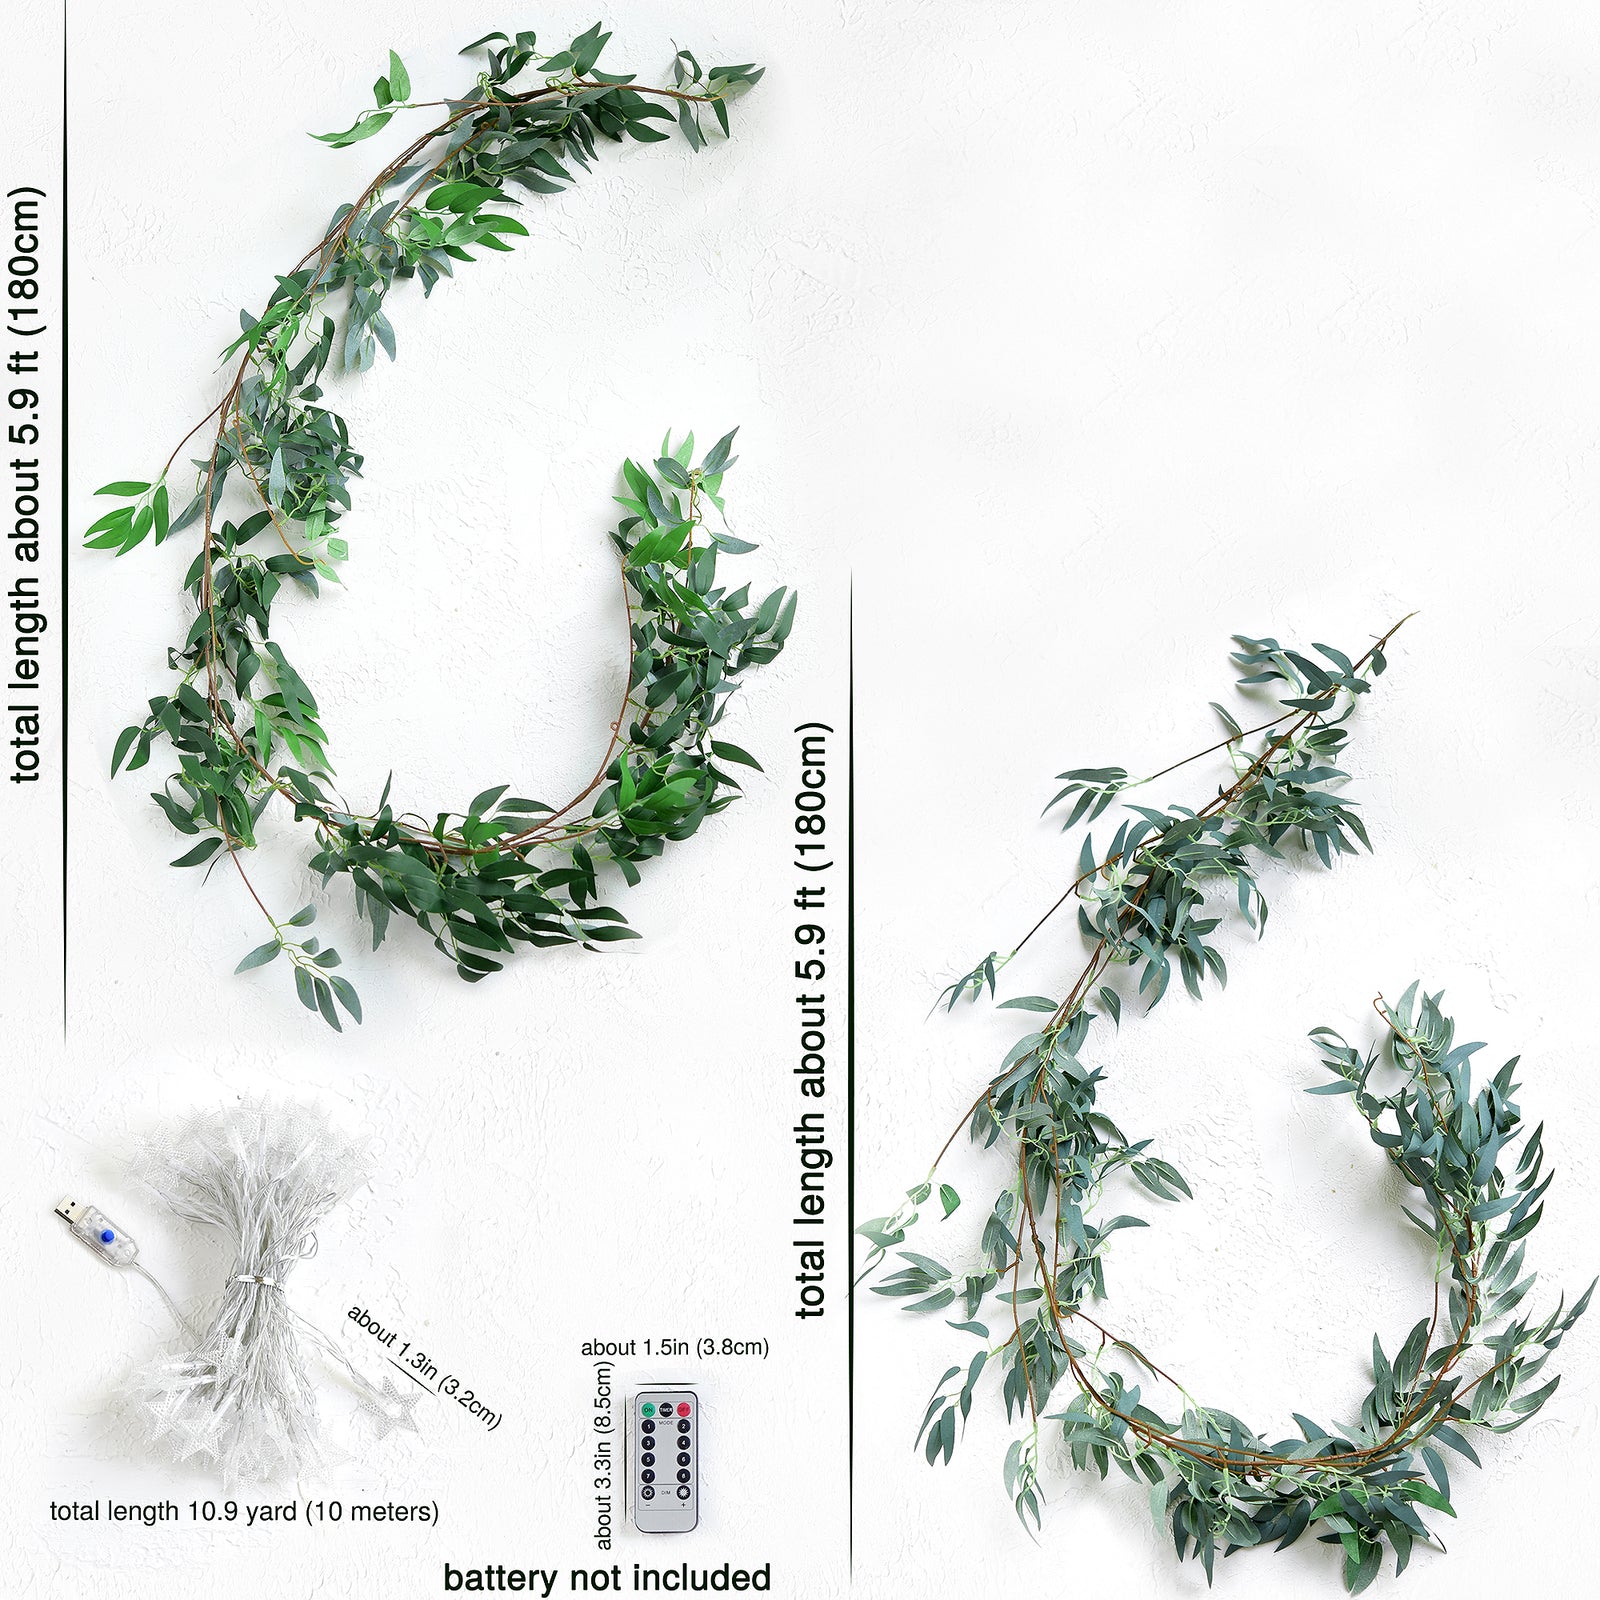 2 Mix Rustic Willow Garlands, Bendable Artificial Greenery Vine Leaves for Wedding Home Decoration with 33 Feet Star String Lights (USB-Powered)